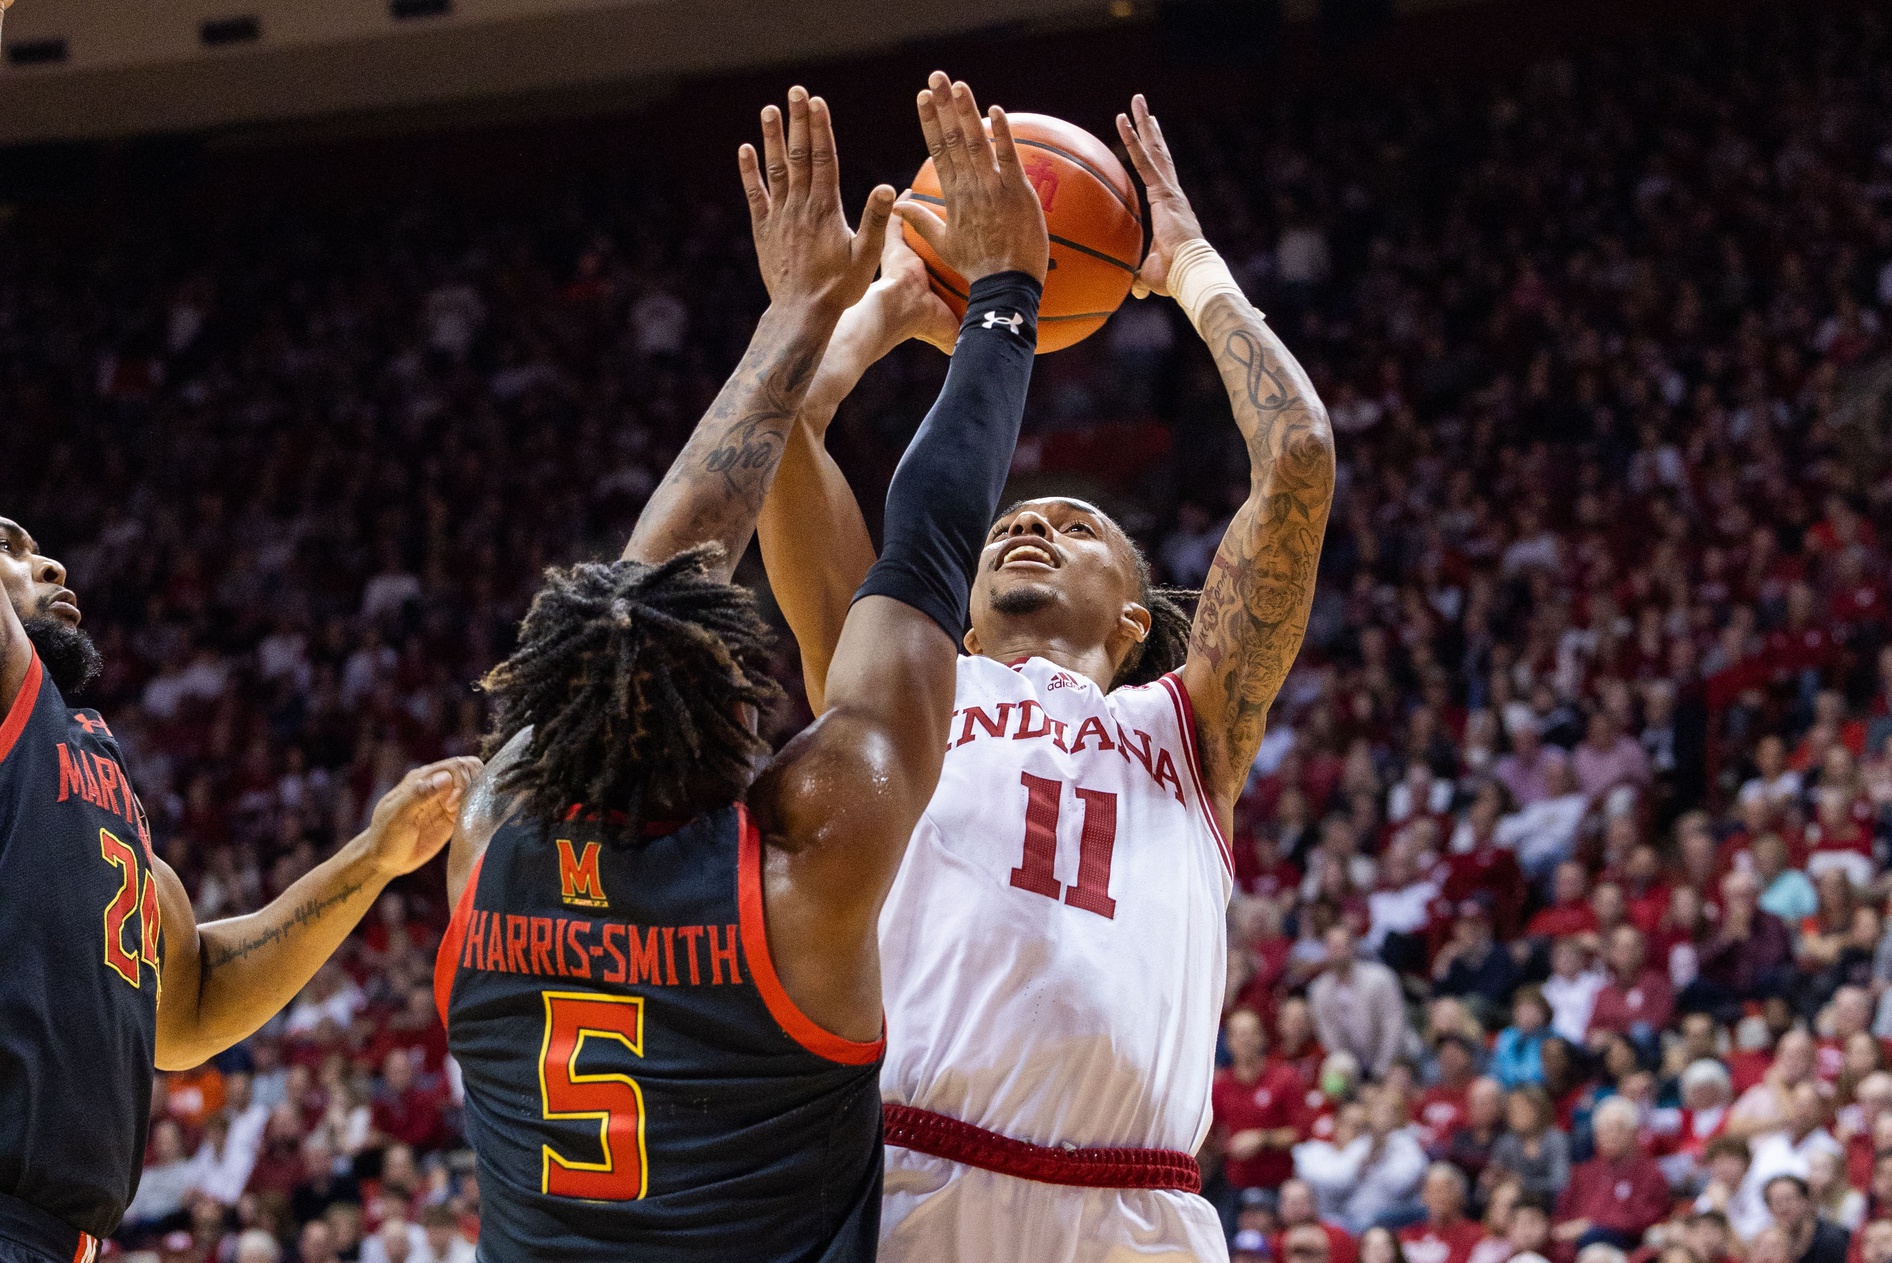 Indiana Hoosiers guard CJ Gunn (11) shoots the ball while Maryland Terrapins guard DeShawn Harris-Smith (5) defends at Simon Skjodt Assembly Hall.